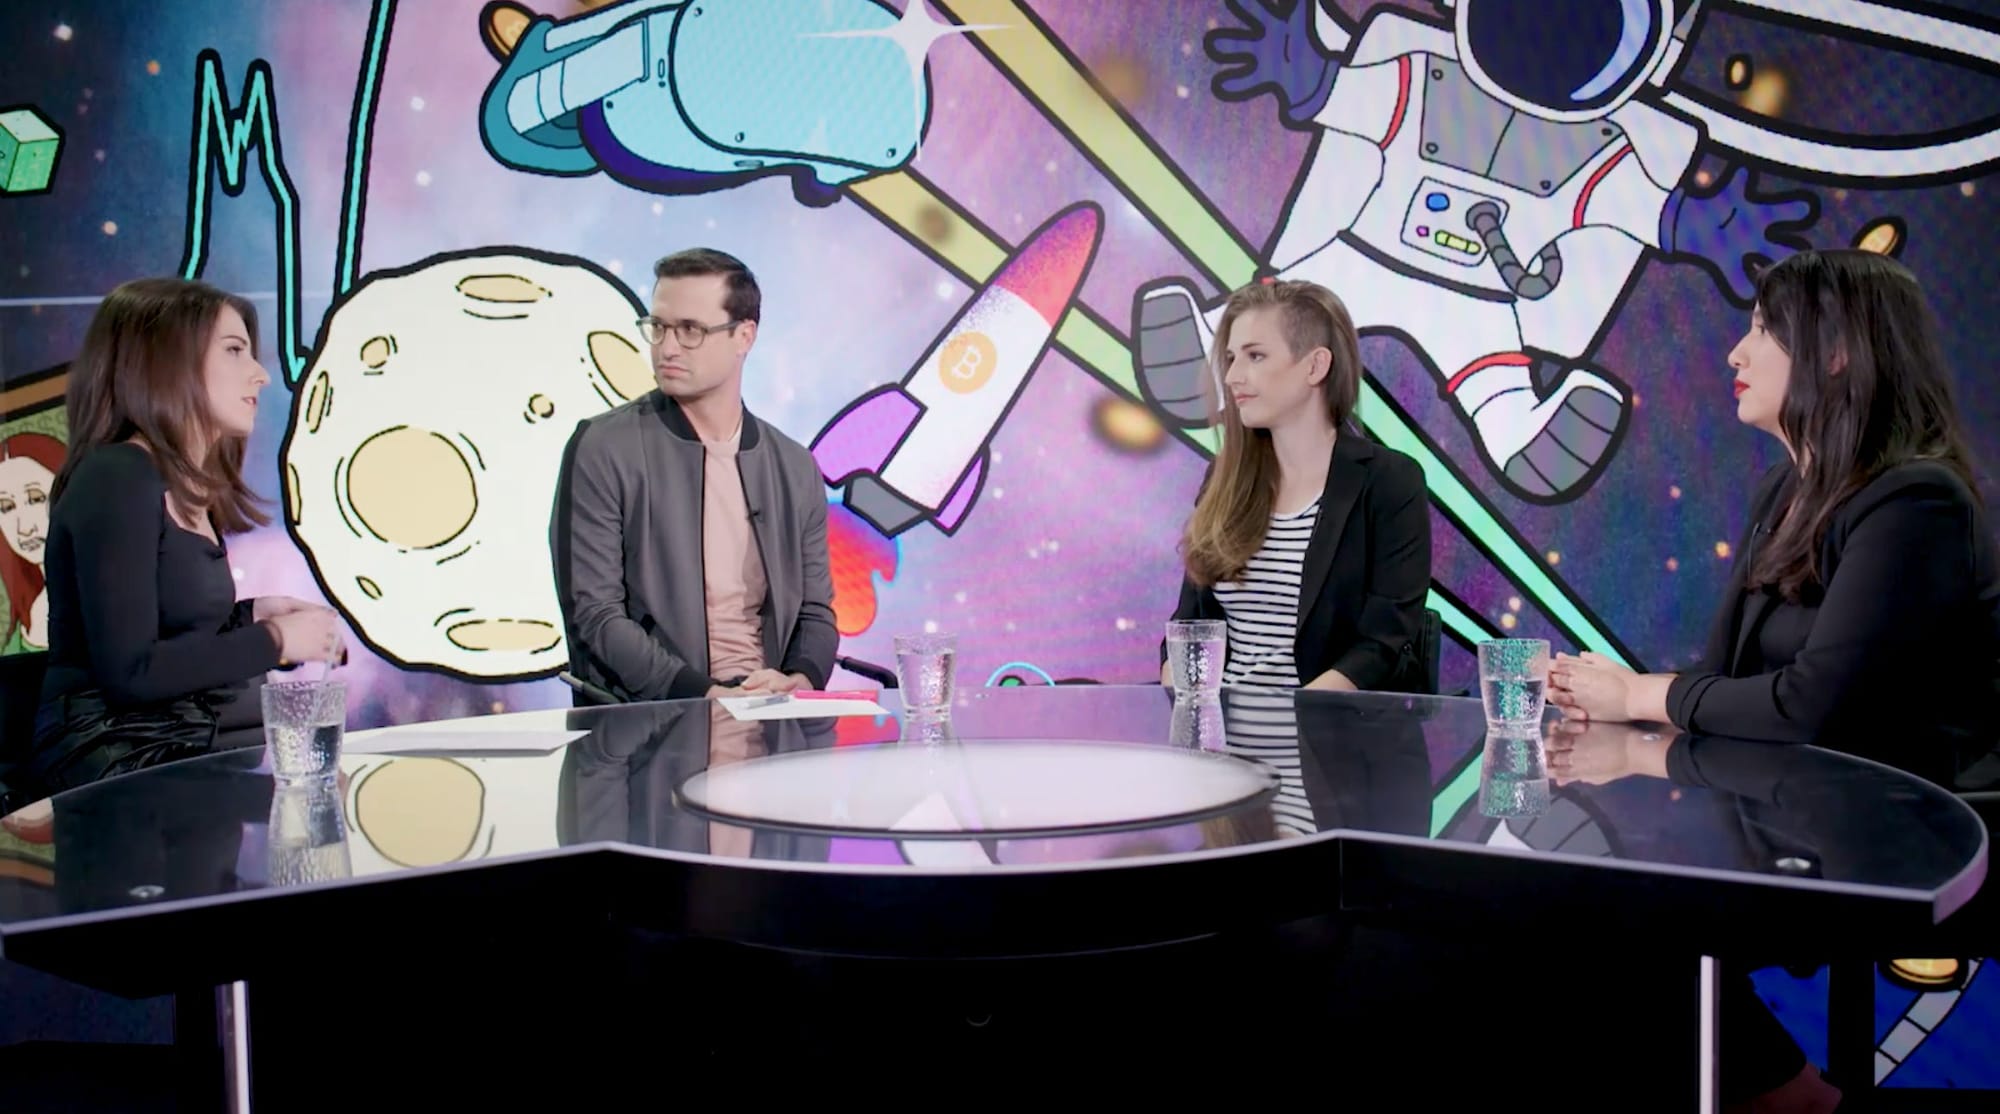 Katie Greifeld, Tim Stenovic, Molly White, and Tonantzin Carmona sit around a semicircular table in front of a backdrop with a space background, covered with cartoonish illustrations of rockets, moons, and crypto charts